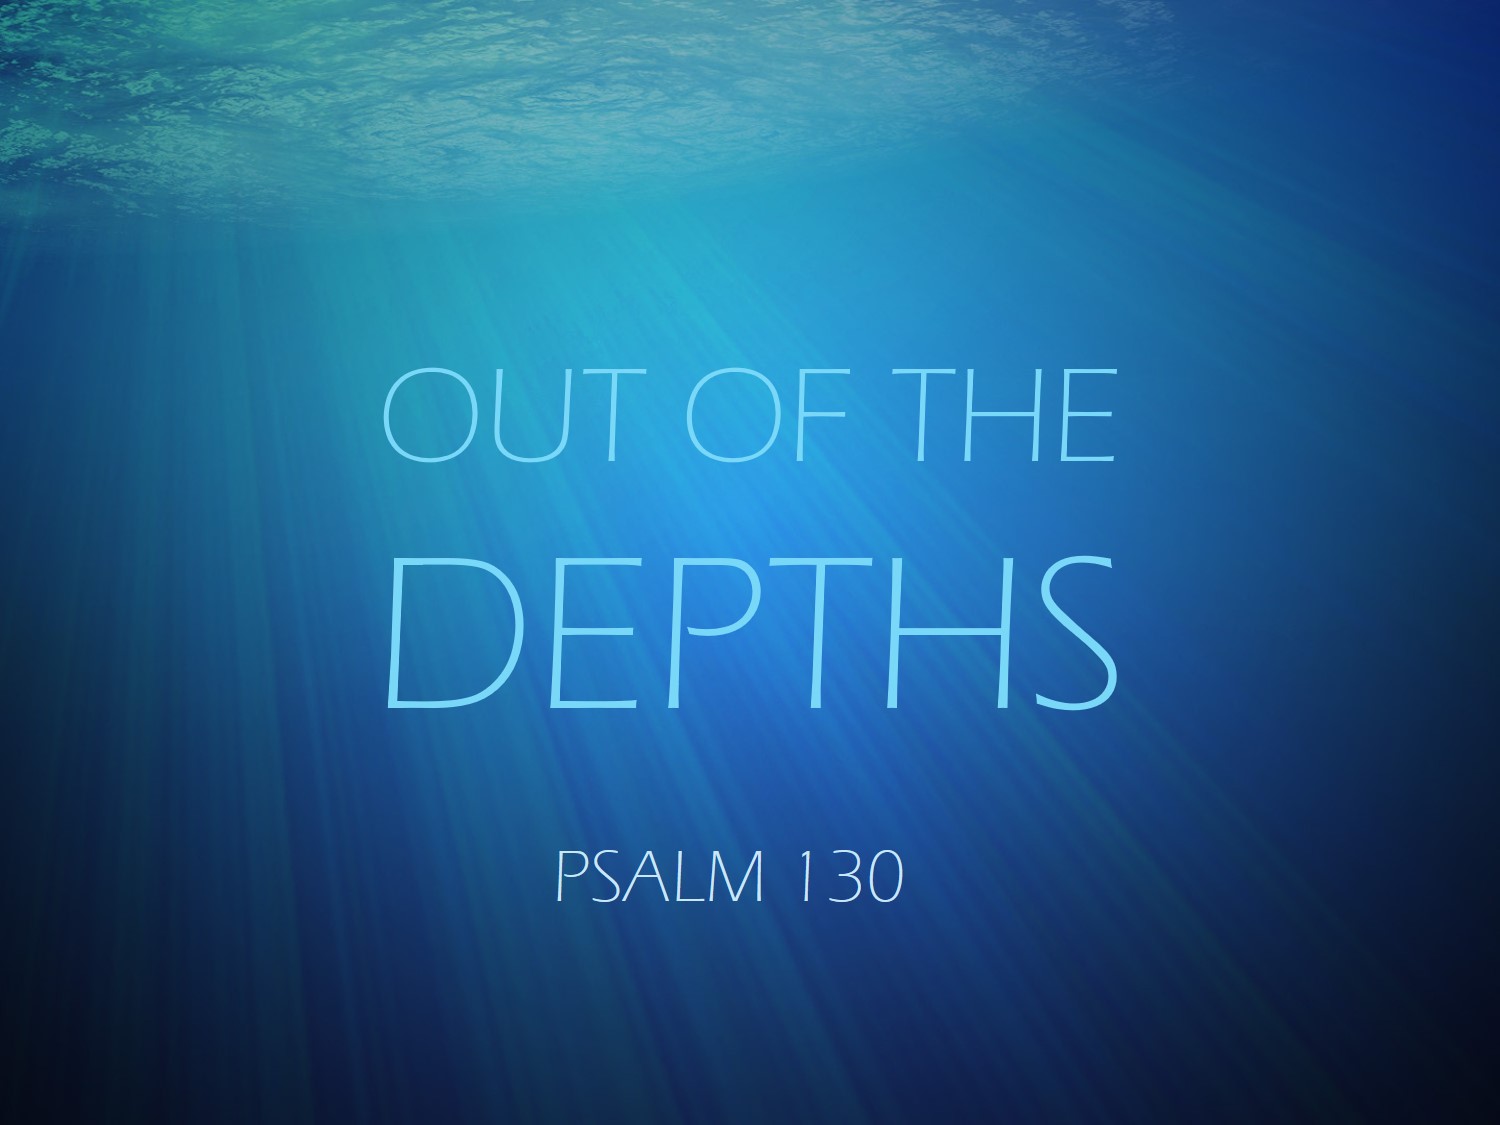 Out of the depths